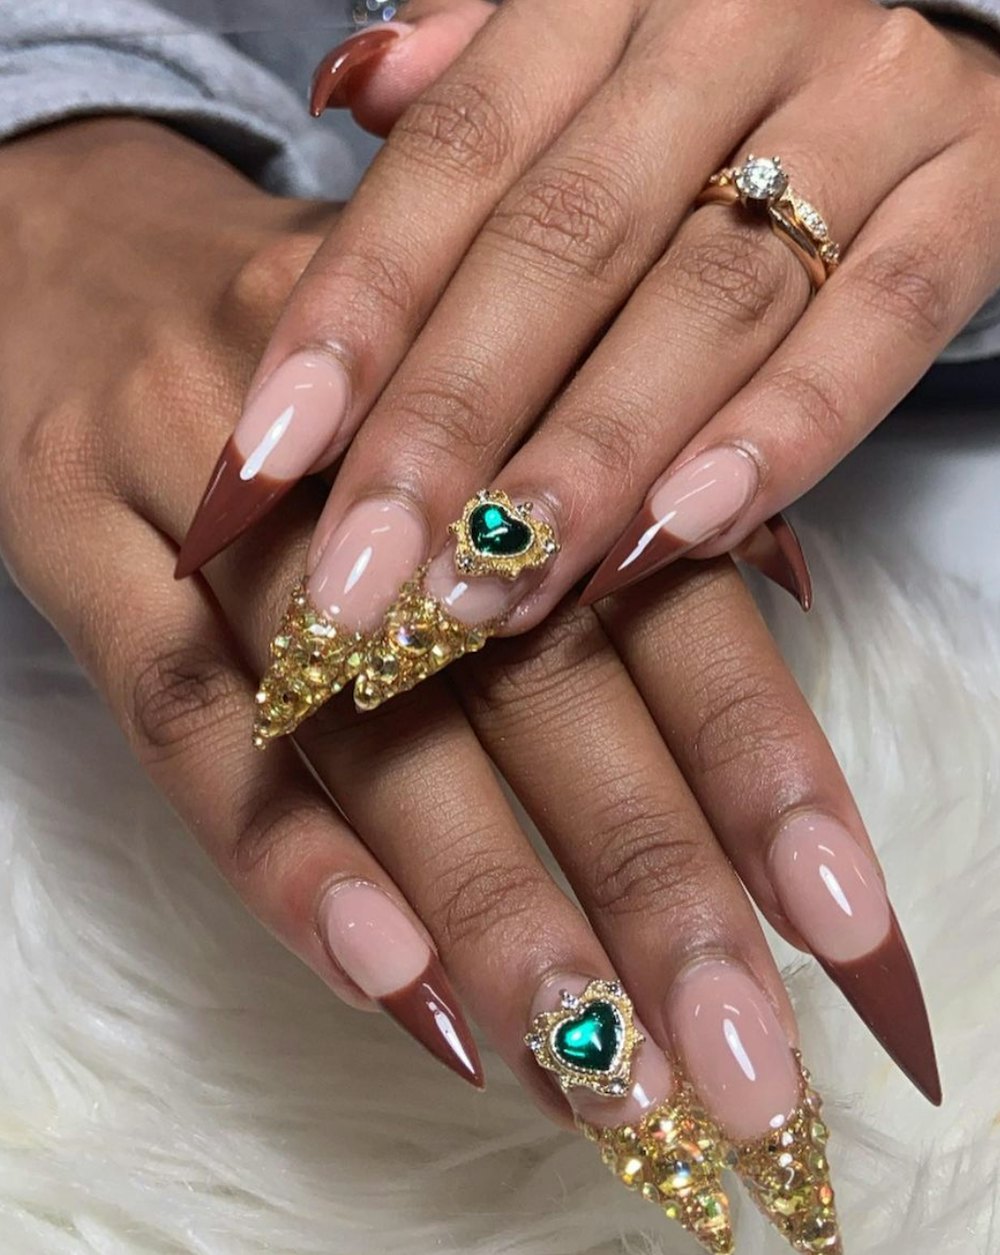 22 Pretty nail art design that you should try - beautiful nail art ideas  ,mismatched nail art ,glam nail design ideas #nail #nailart #nails  #naildesign #n… | Naglar